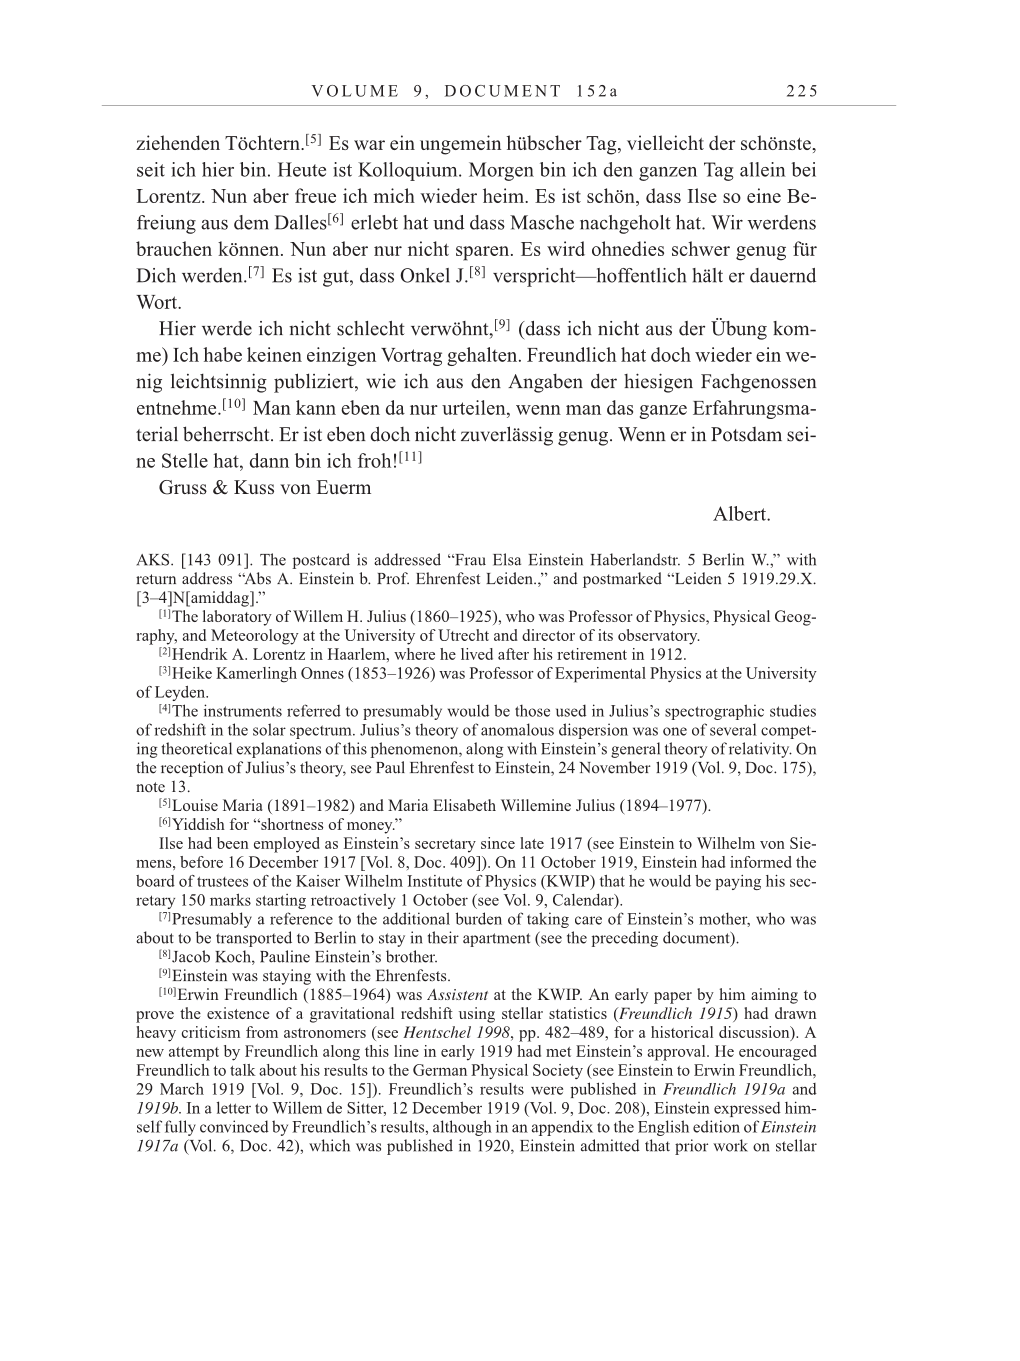 Volume 10: The Berlin Years: Correspondence May-December 1920 / Supplementary Correspondence 1909-1920 page 225